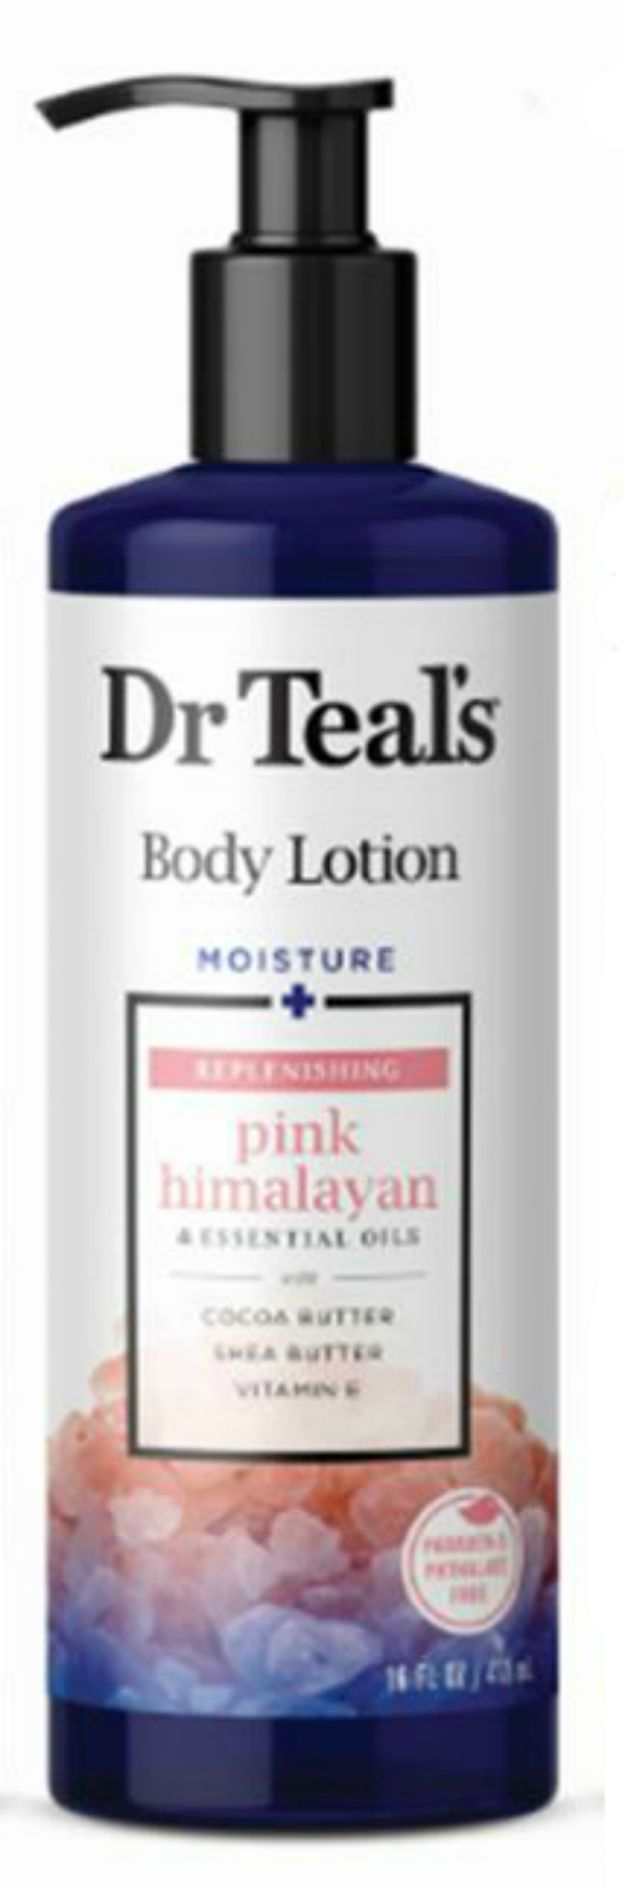 Dr. Teal's Pink Himalayan Lotion | Best Lotions for Dry Skin to Keep You Moisturized During the Holidays | lotion & moisturizer